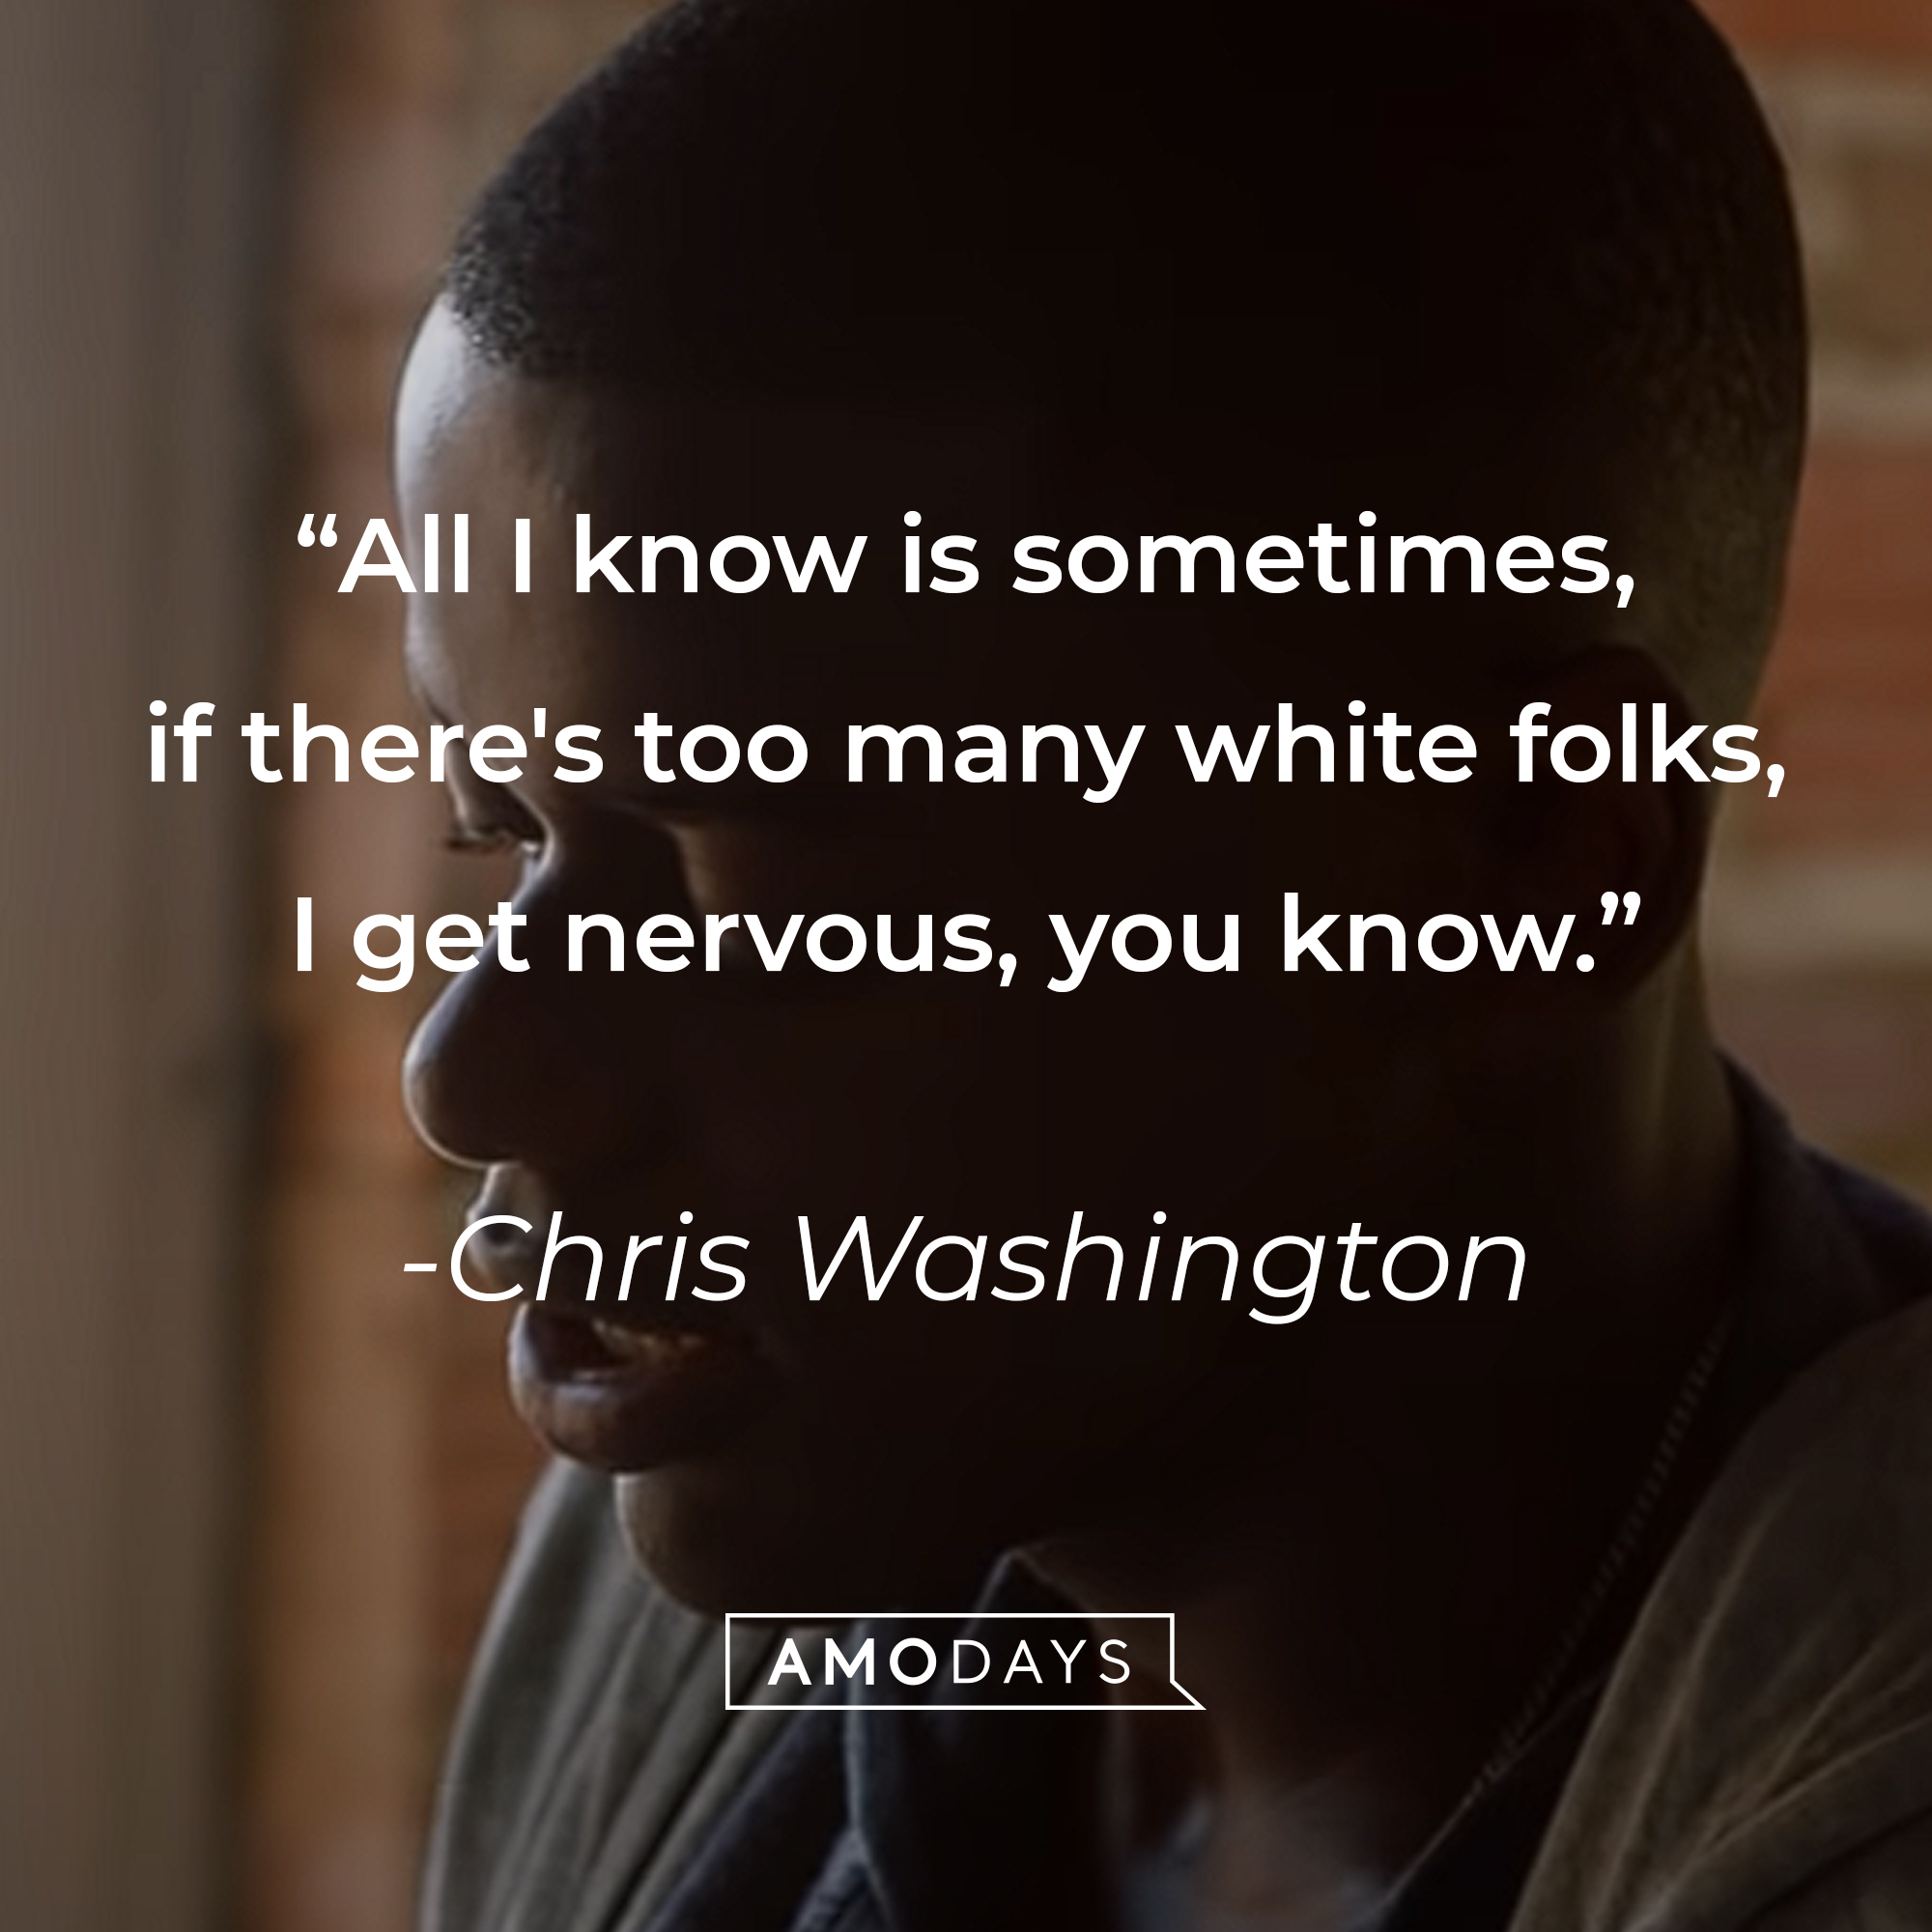 An image of Chris Washington with his quote: “All I know is sometimes, if there's too many white folks, I get nervous, you know.” | Source: youtube.com/UniversalpicturesIta